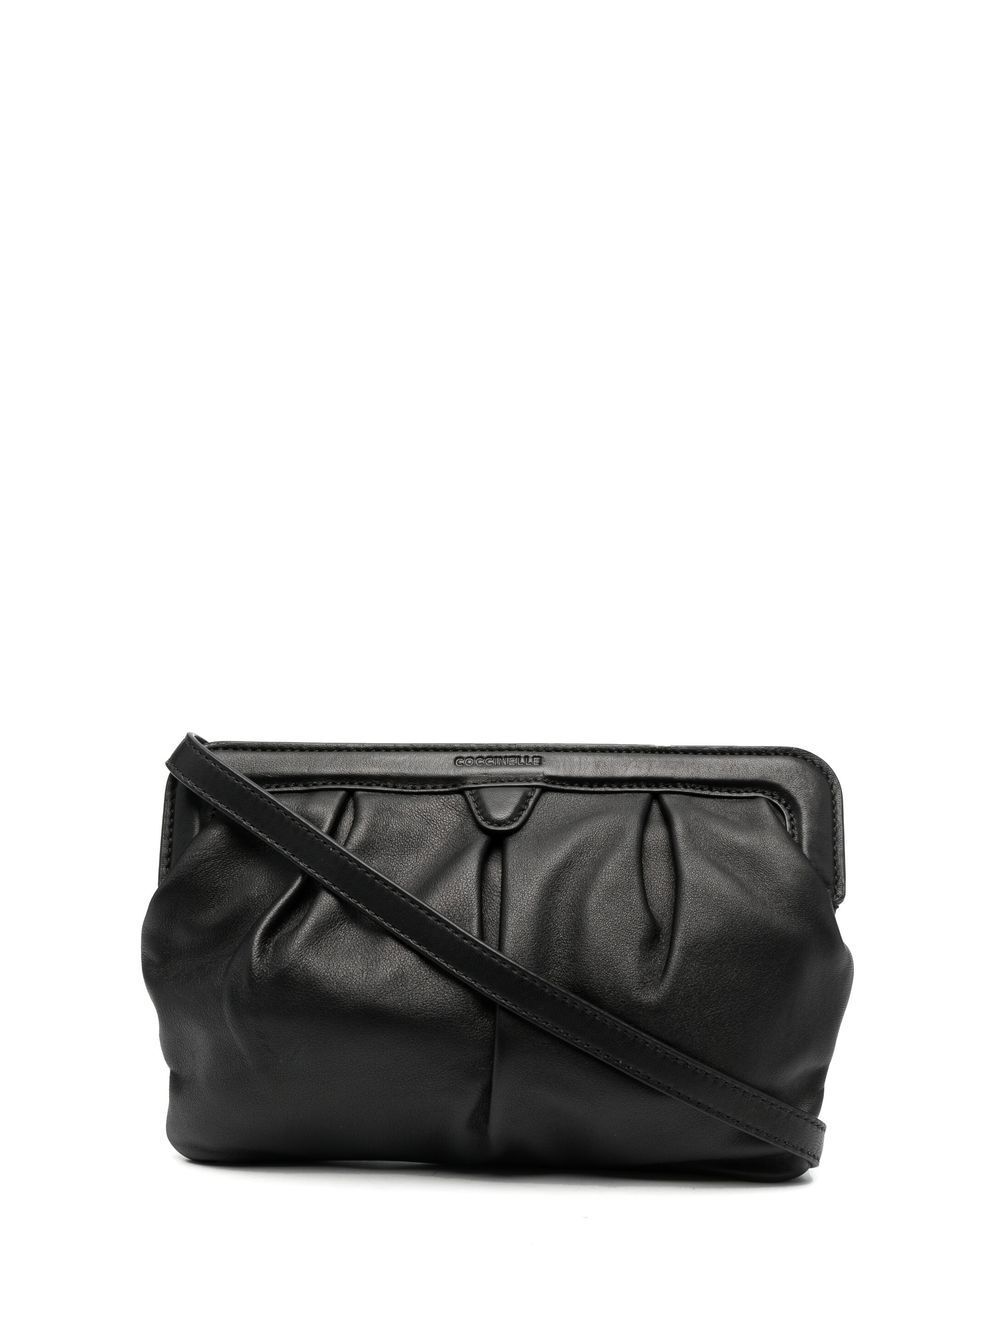 Coccinelle ruched leather clutch bag - Black